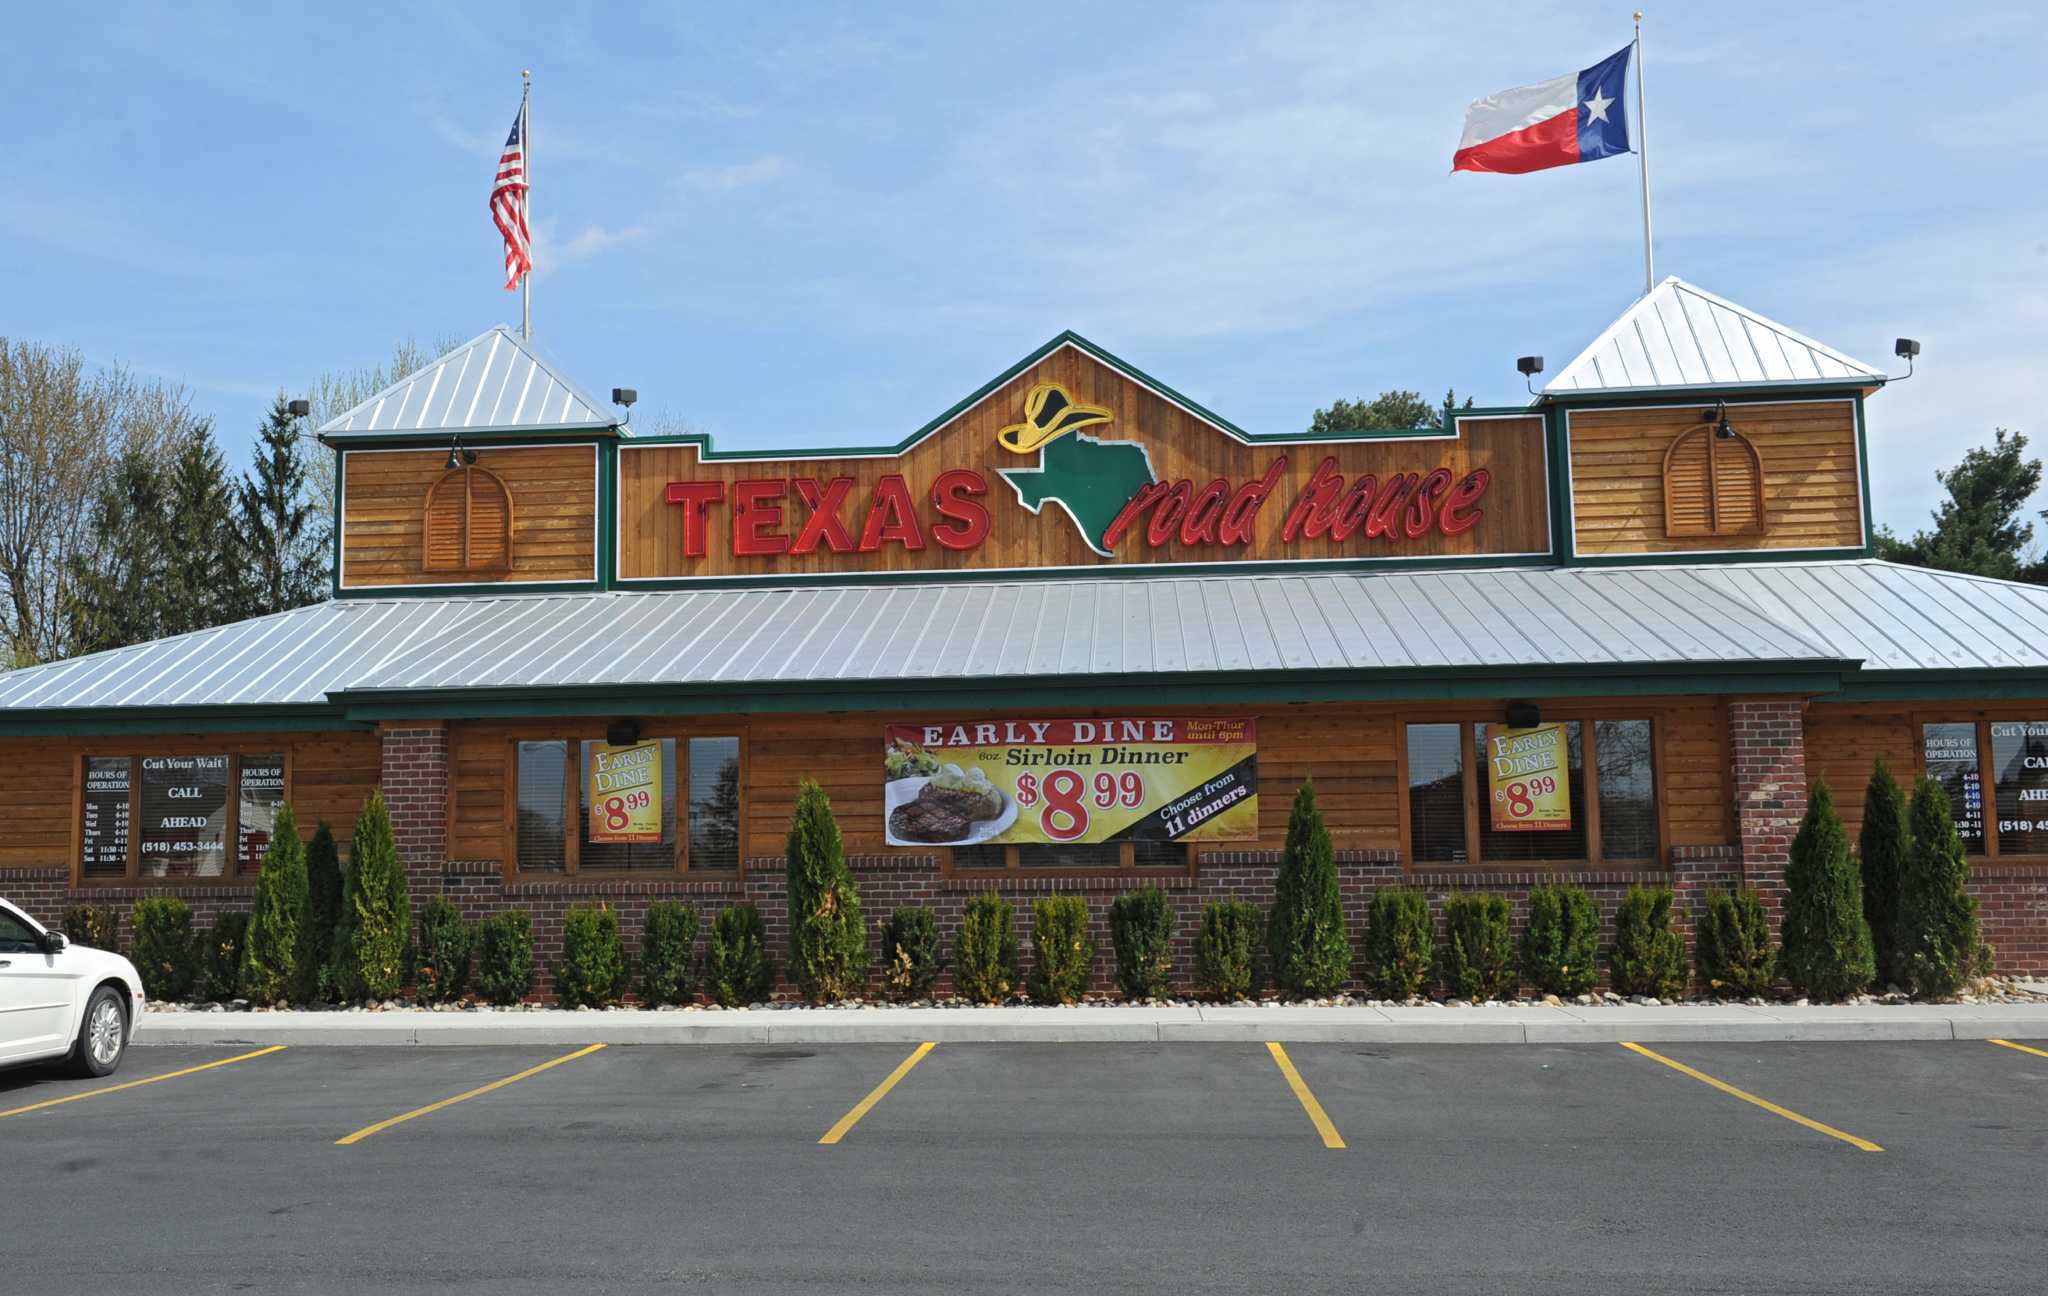 11 things you need to know before eating at Texas Roadhouse